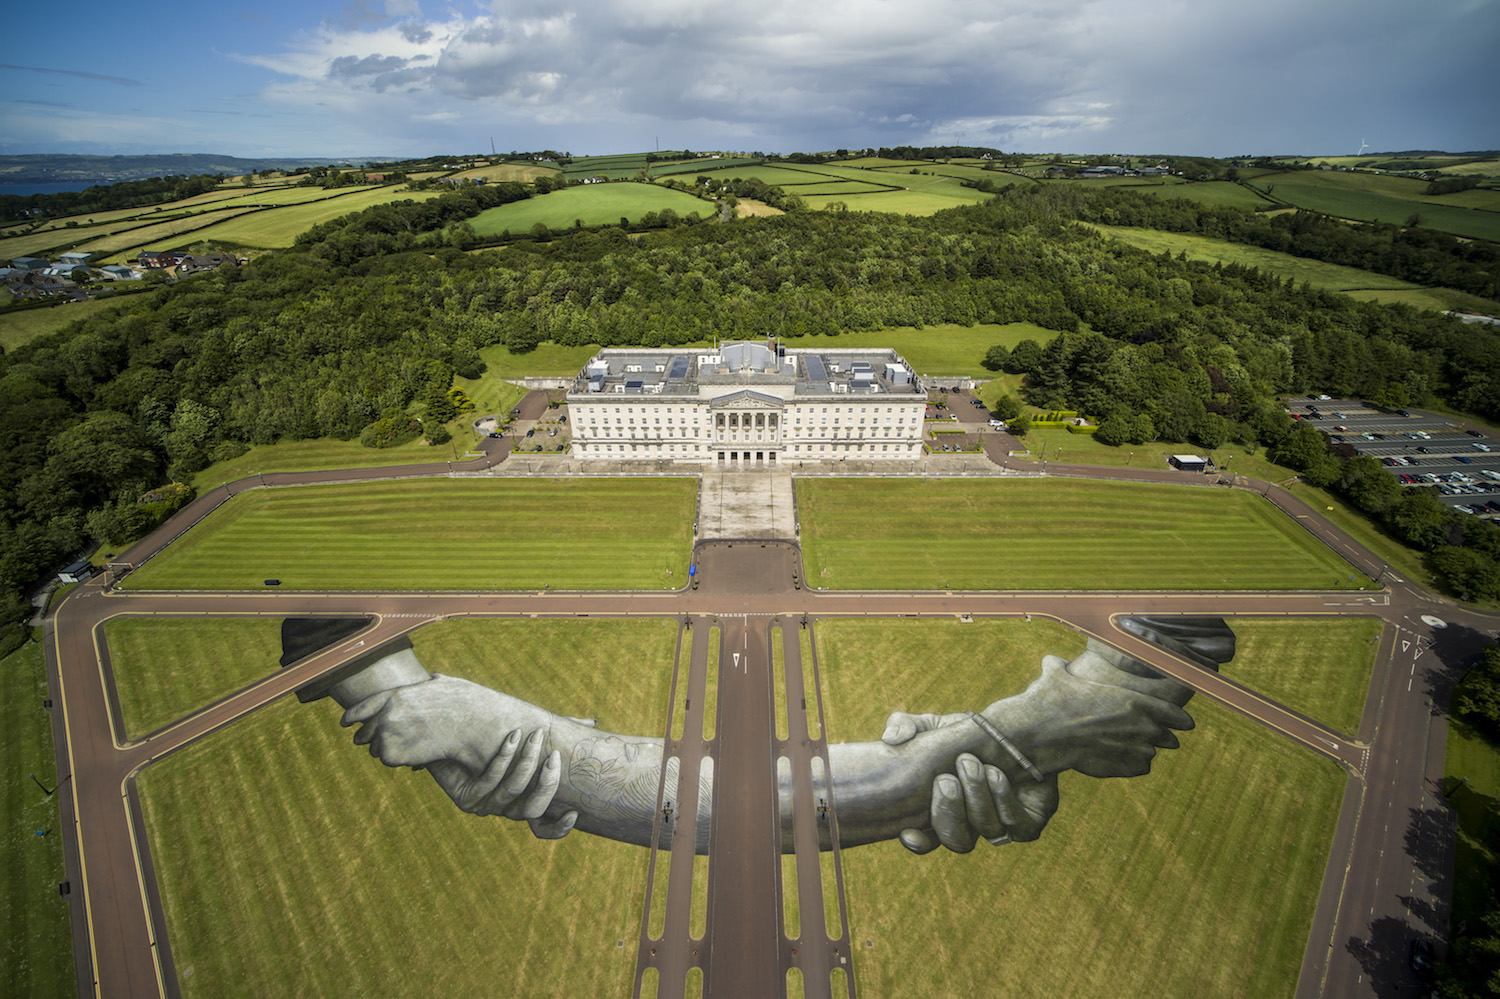 Artist Saype Extends the World’s Largest Human Chain to Northern Ireland, 2022